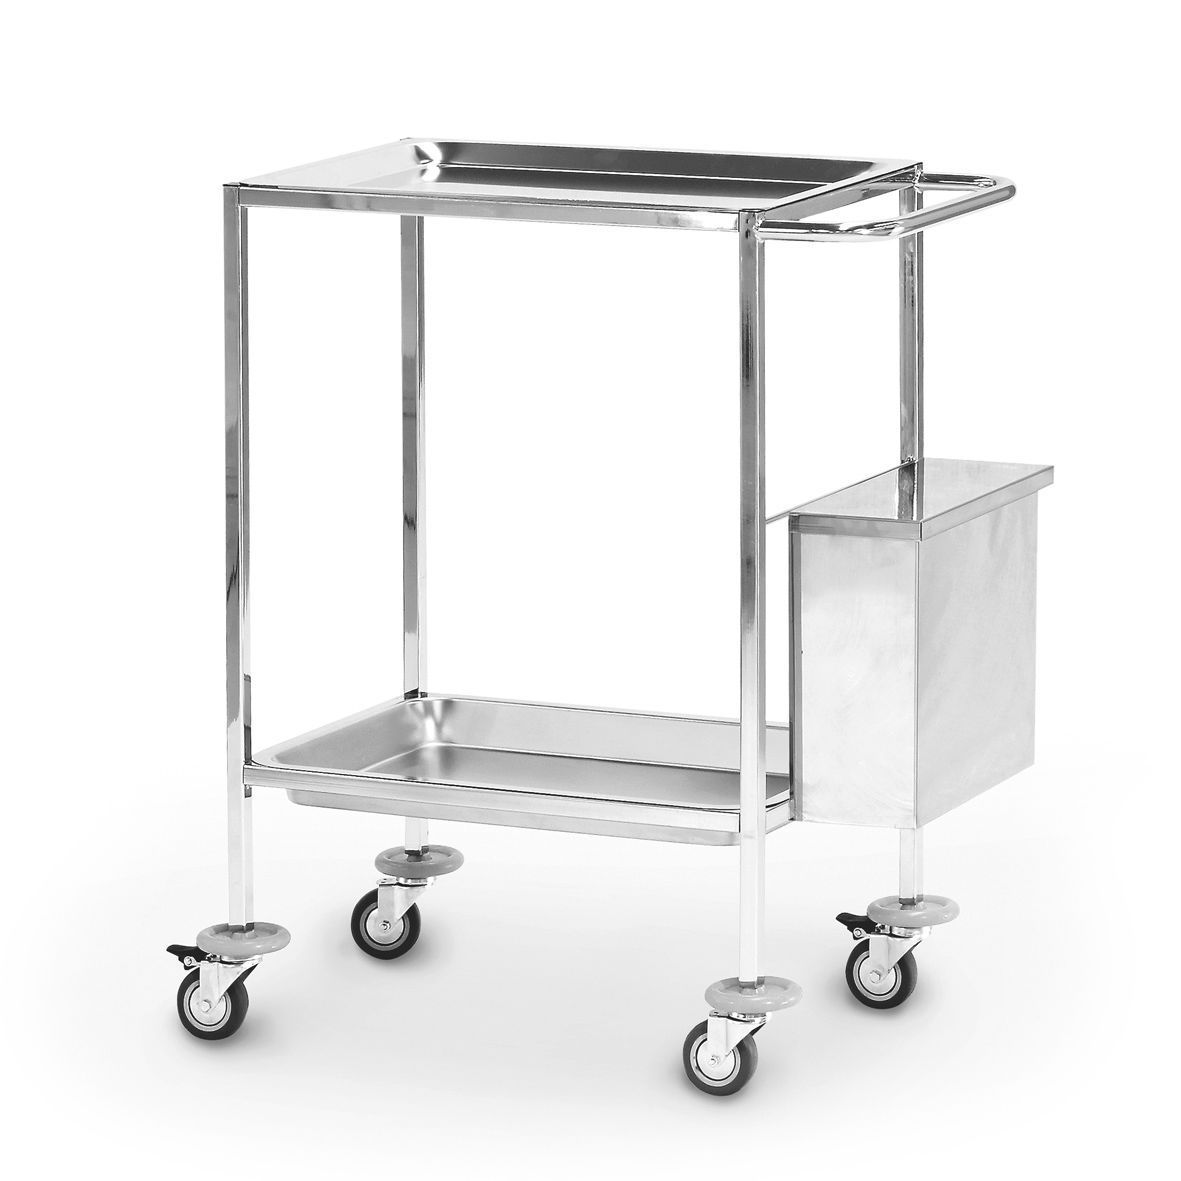 Dressing trolley / stainless steel / 2-tray 2.08.012 Lubb